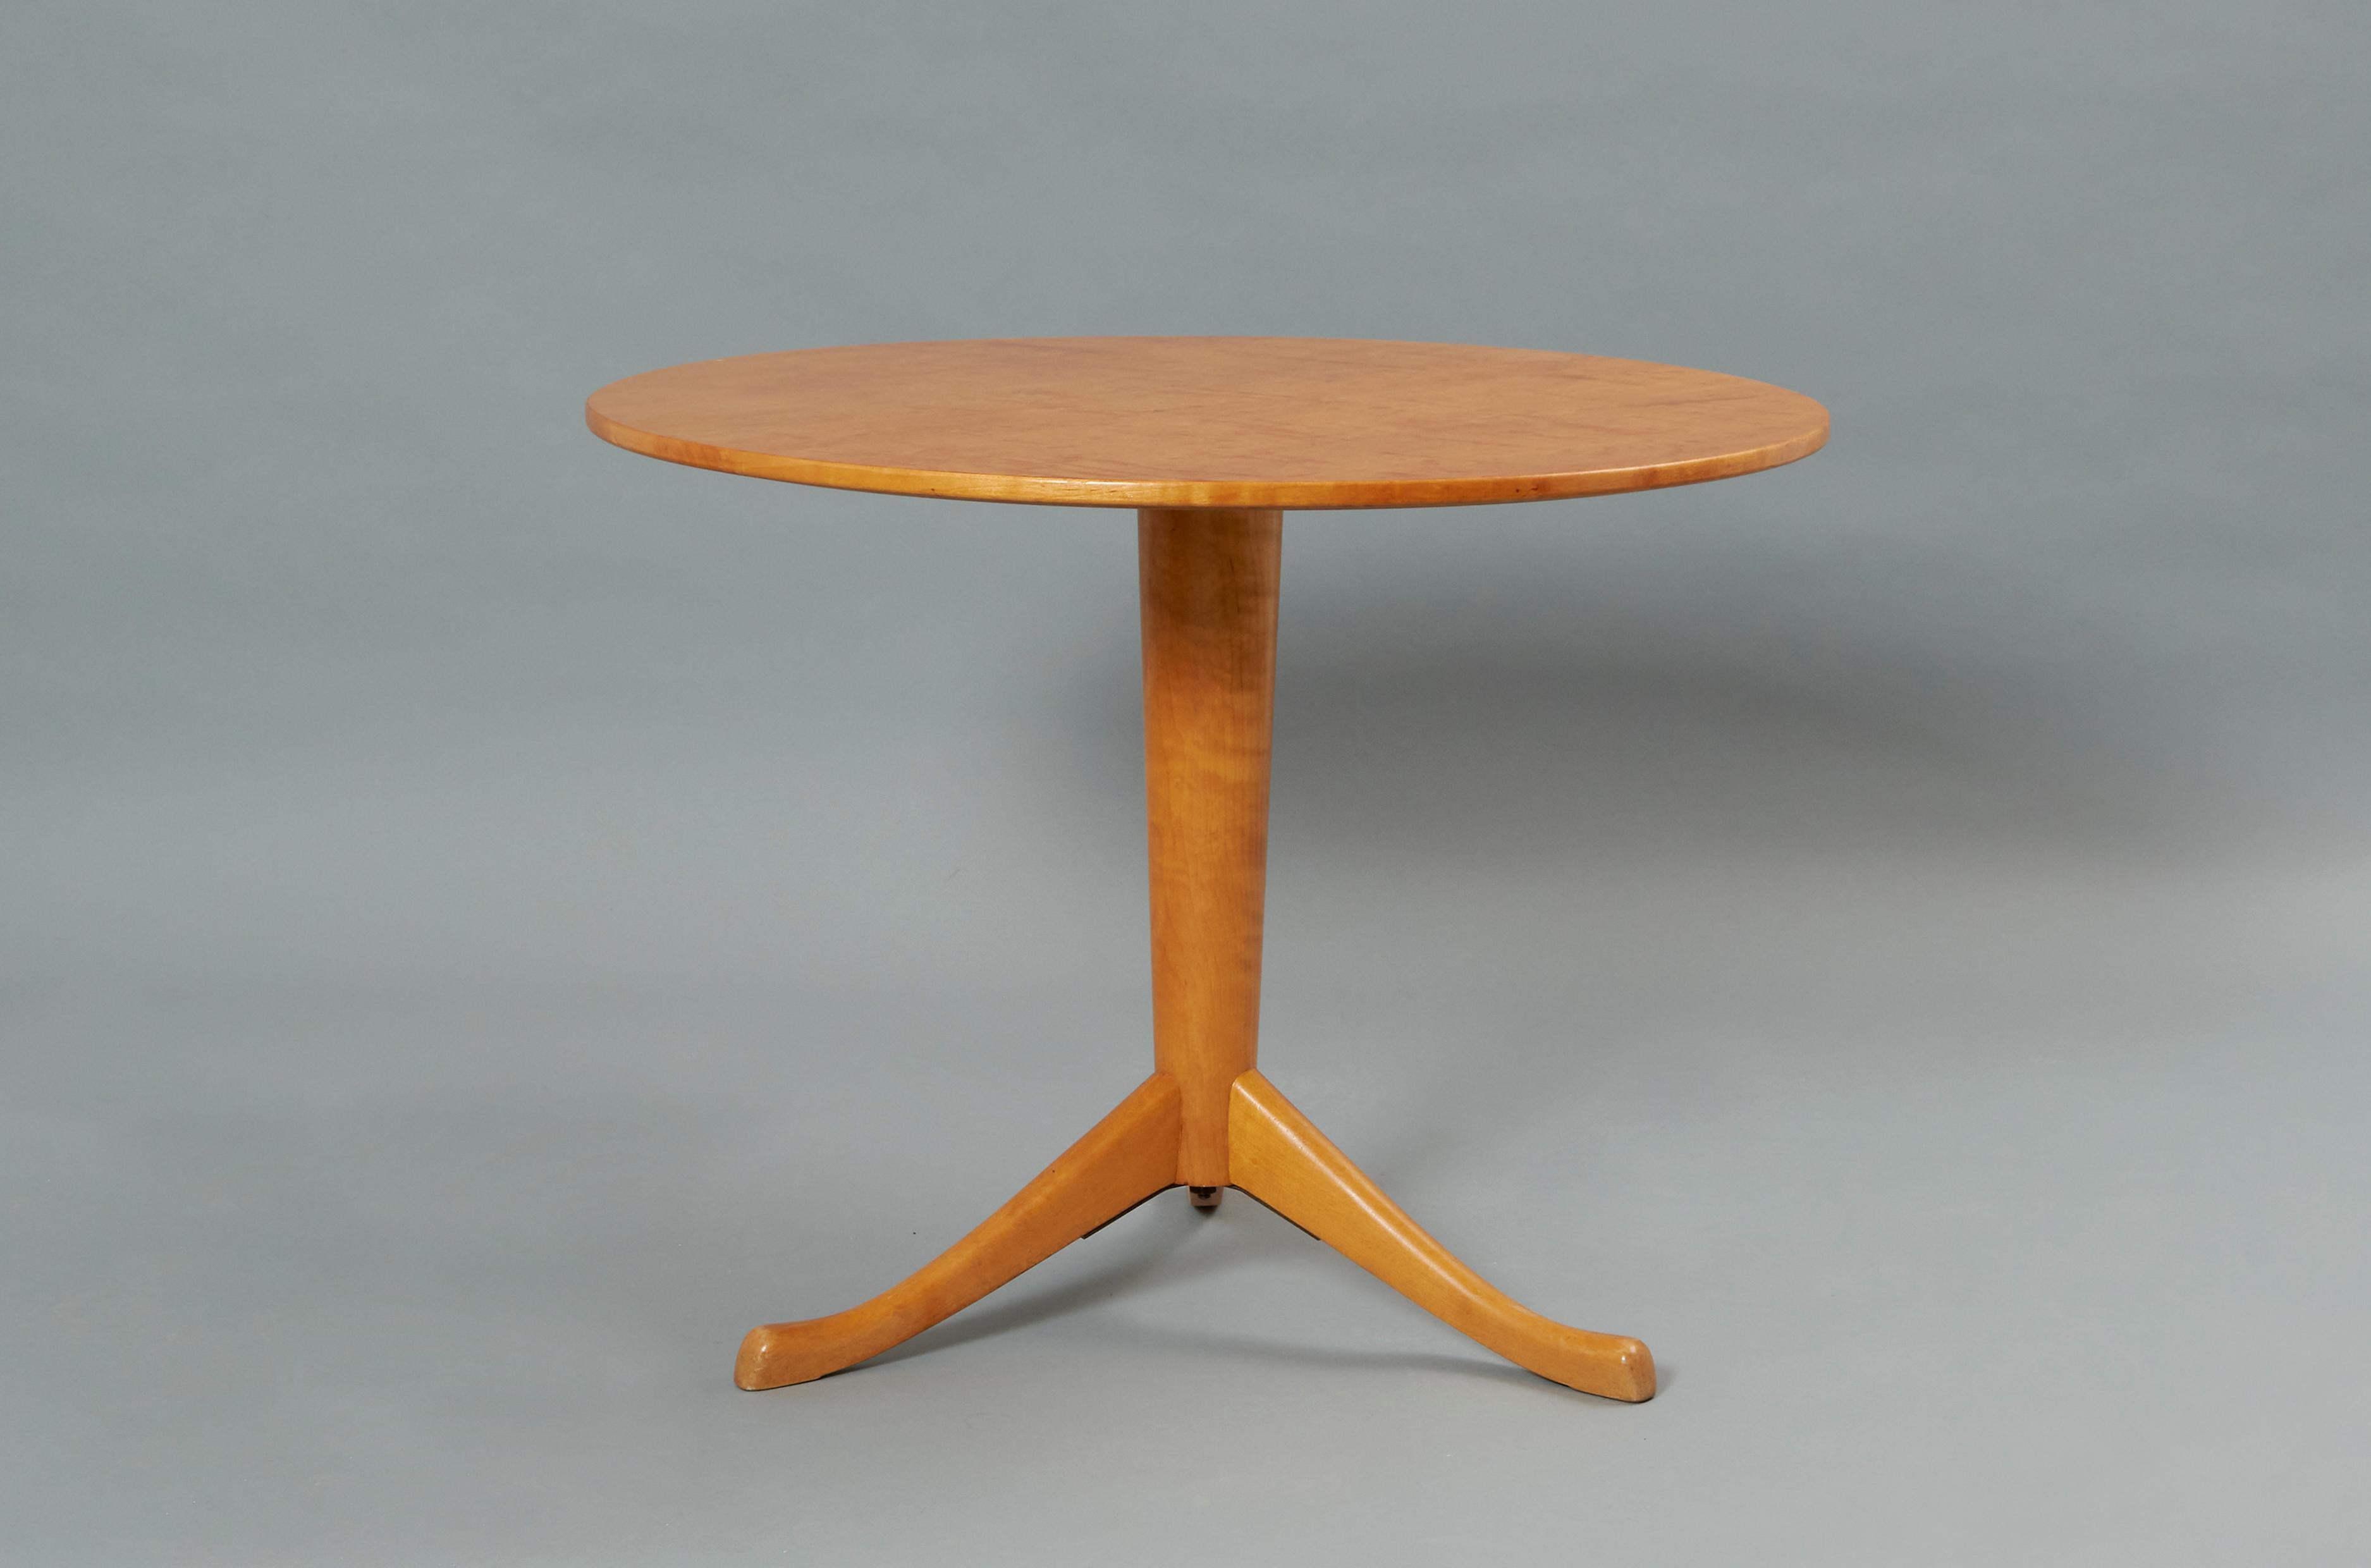 A round side or gueridon table by axel Larsson for Svenska Möbelfabrikerna Bodafors in birch, Sweden circa 1940. 
This model “1504” table was part of the 1936 “Fritiden” exposition in Ystad, Sweden. Fully refinished.

Axel Larsson (1898-1975was a